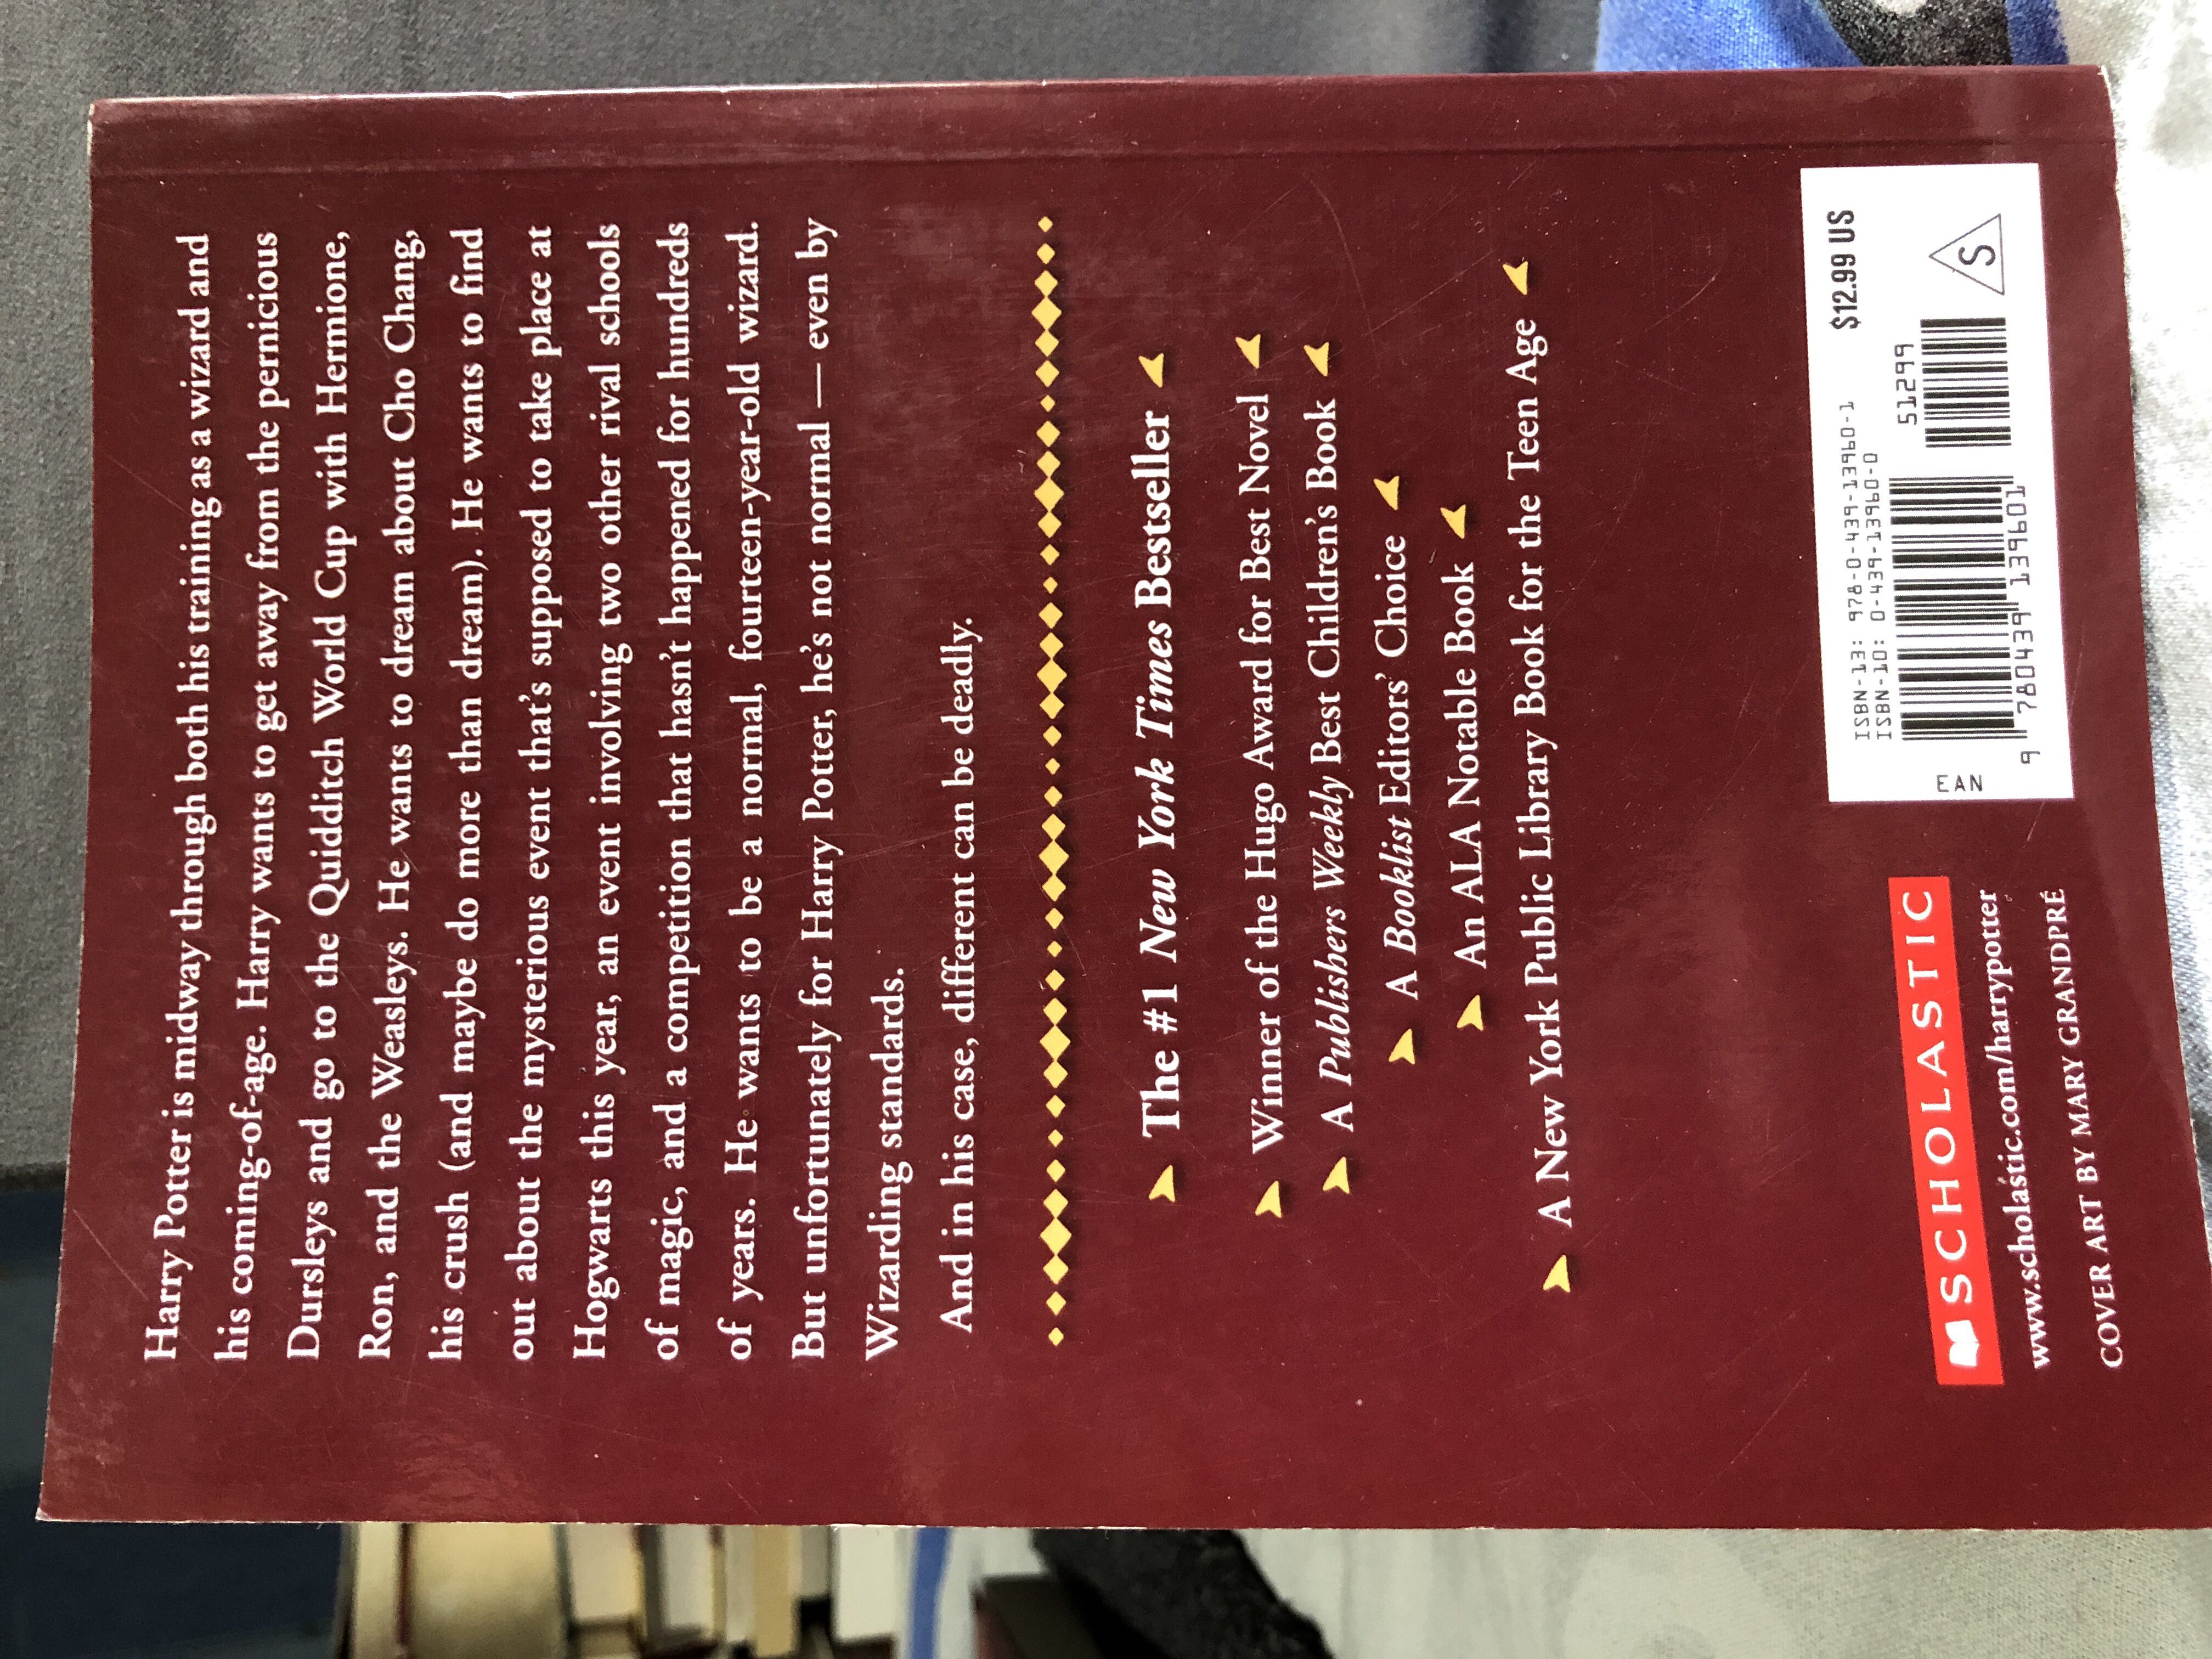 Harry Potter And The Goblet of Fire - J.K. Rowling (Scholastic Inc. - Paperback) book collectible [Barcode 9780439139601] - Main Image 3